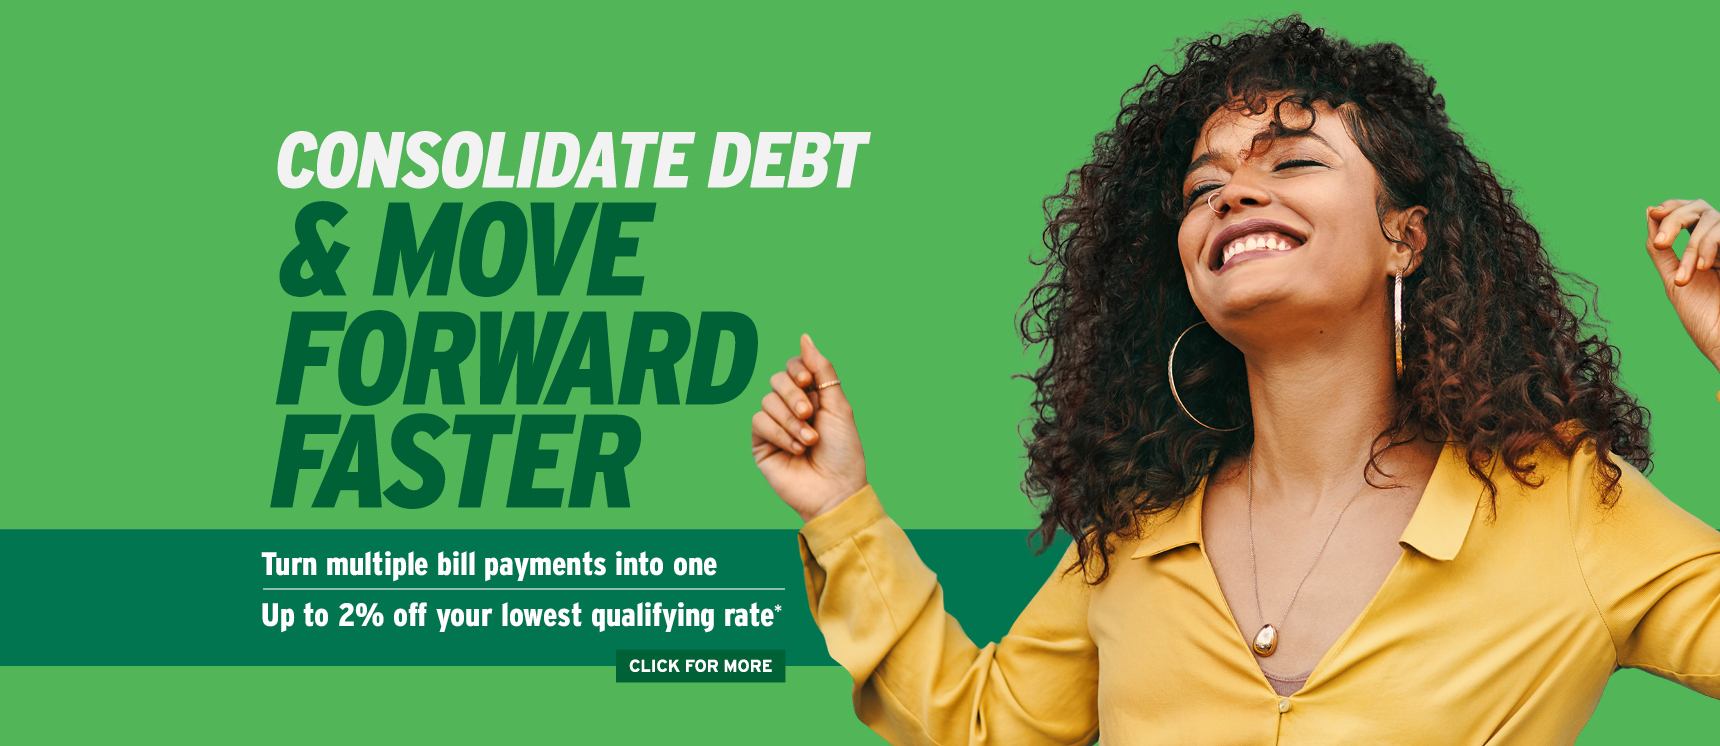 Happy woman dancing who just saved with a new debt consolidation loan